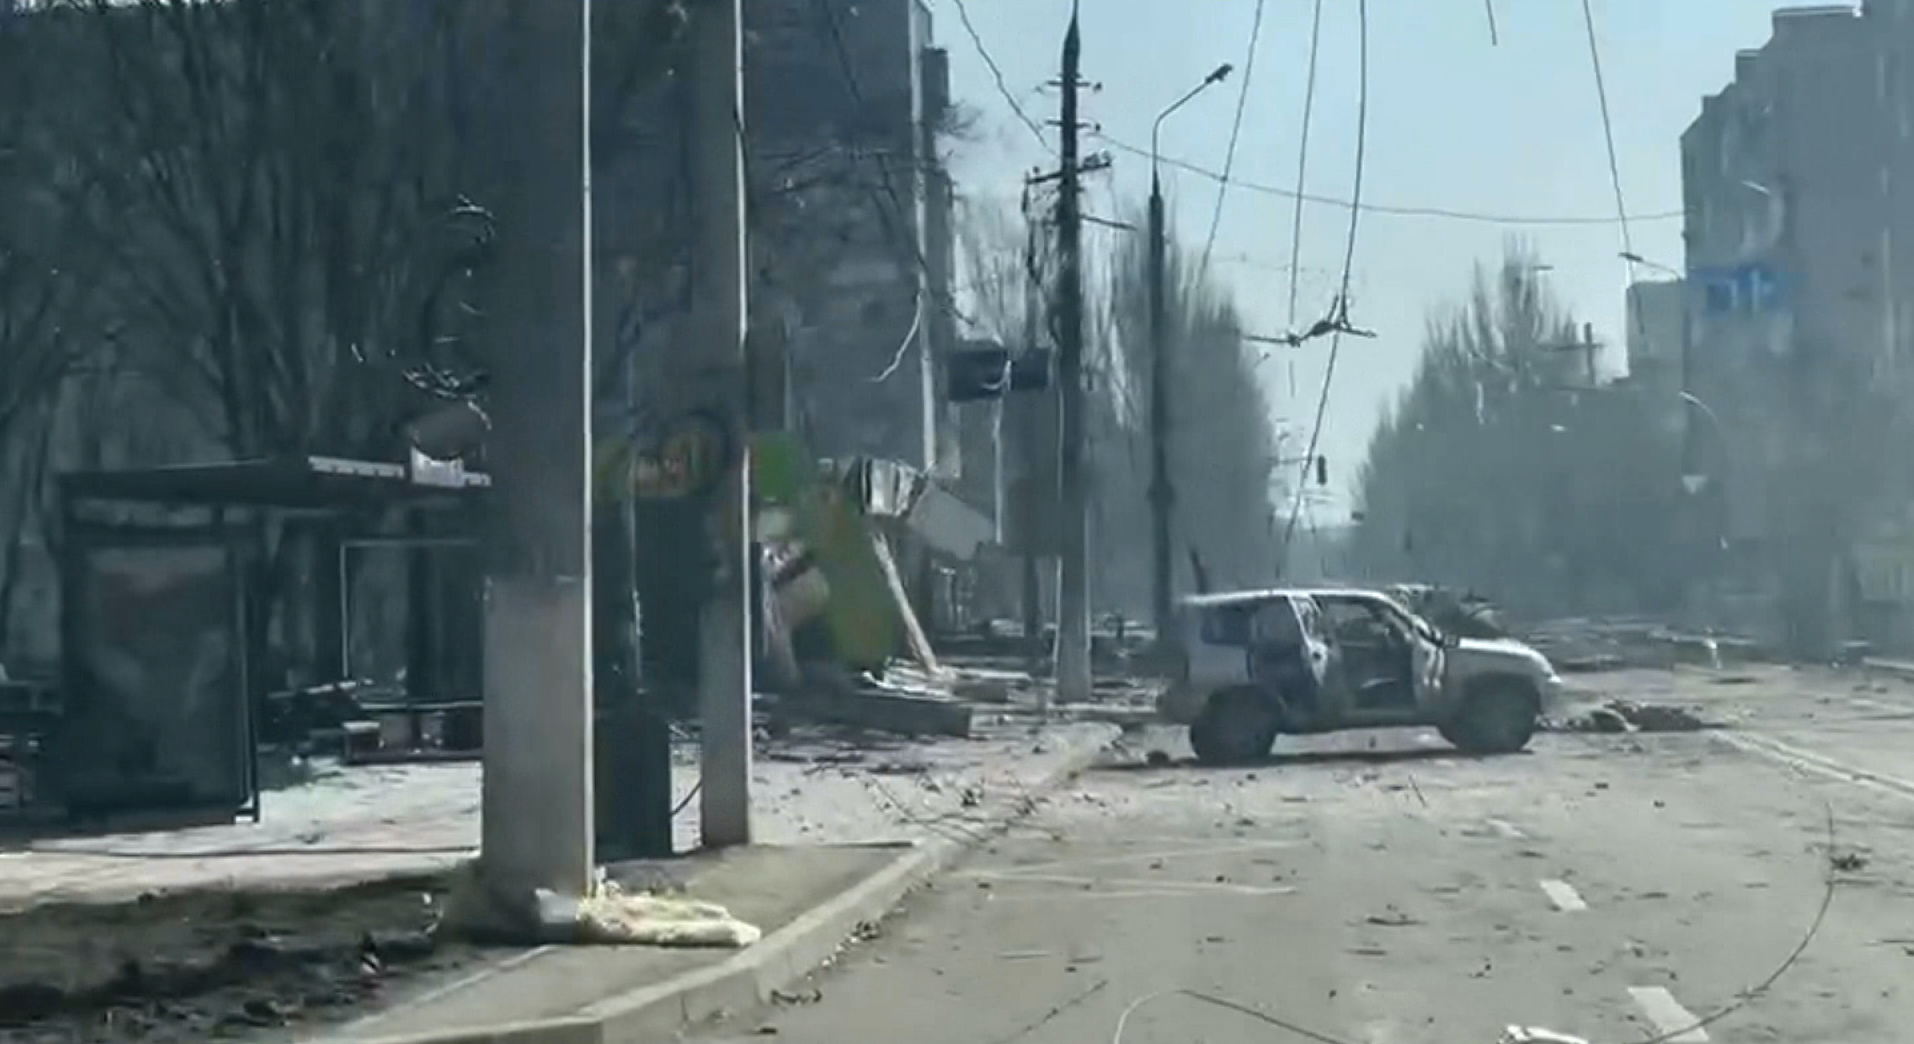 An image of Mariupol from a video obtained by CNN.